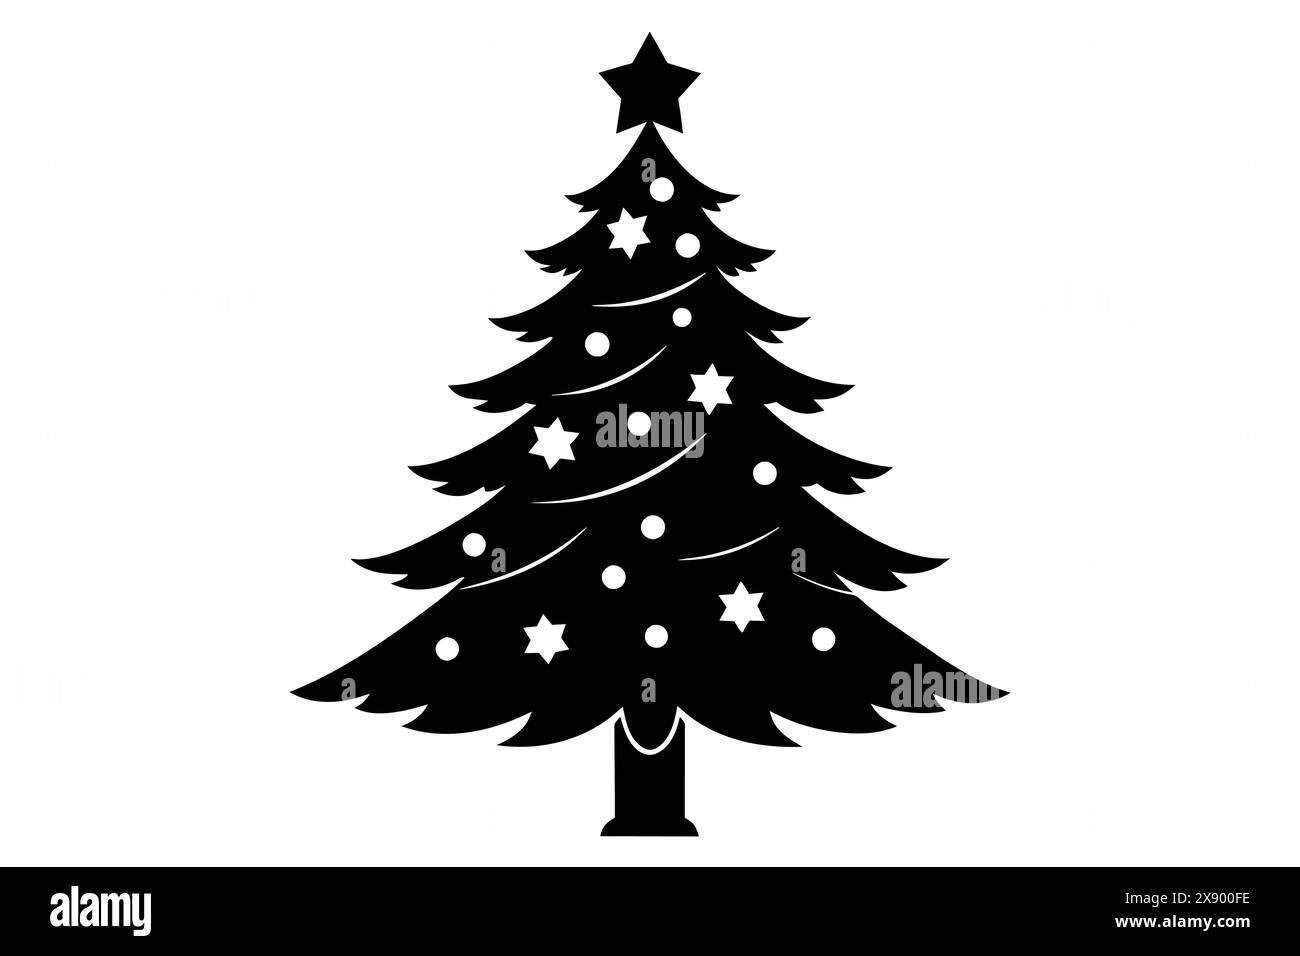 Black Christmas tree with decorations and star on top. Festive, holiday season, celebration, New year, festive design concept. Black silhouette isolat Stock Vector